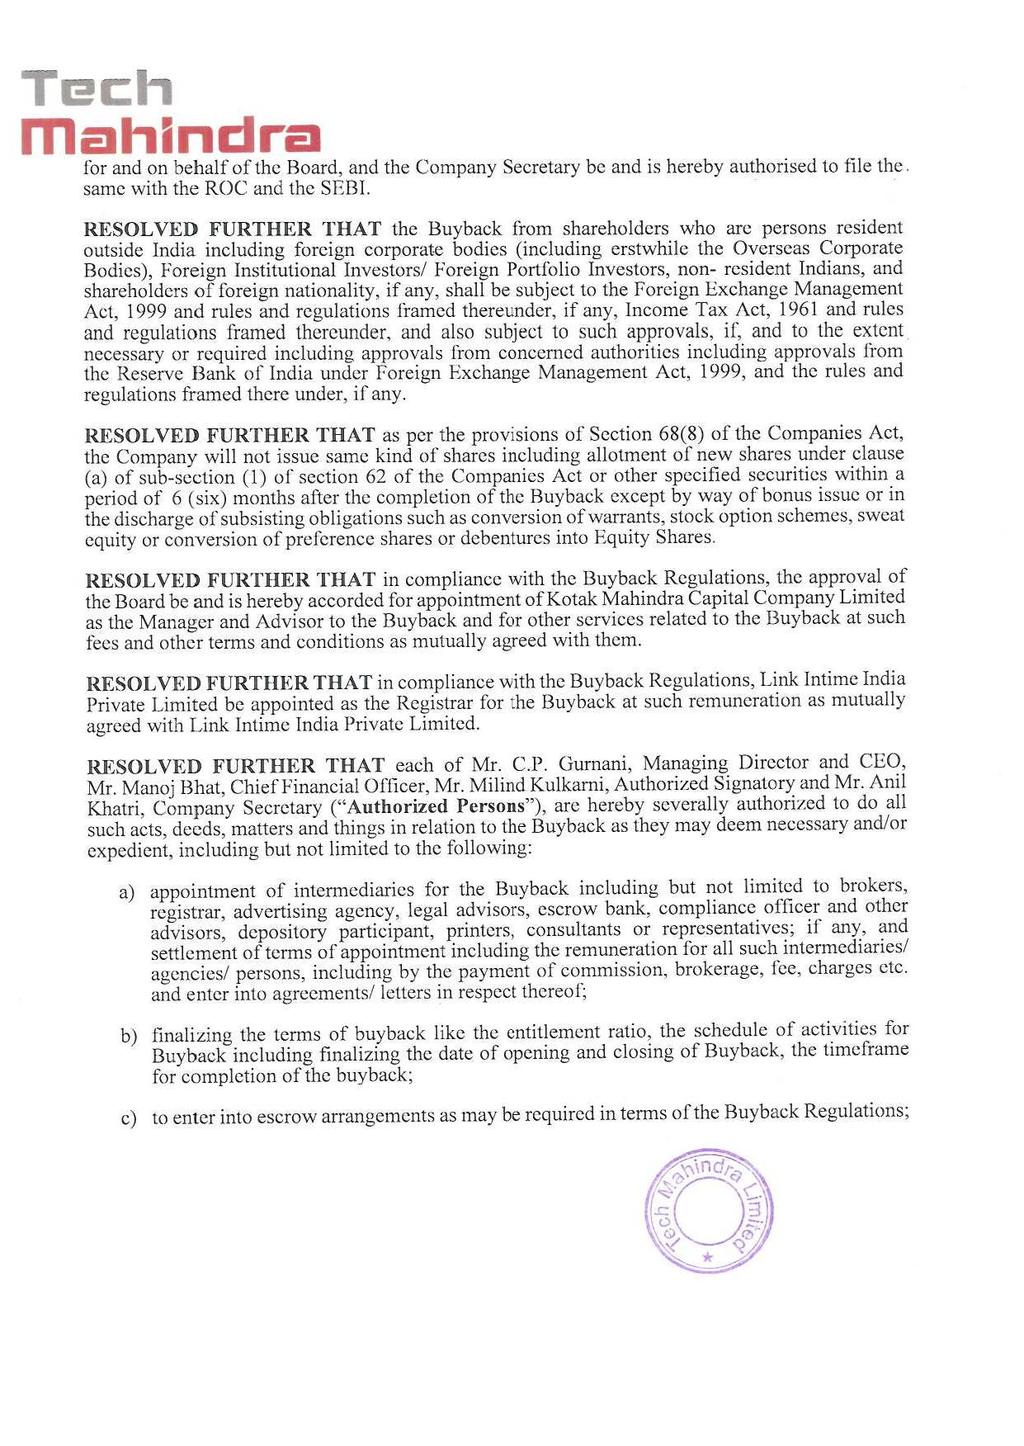 Tech mahindra for and on behalf of the Board, and the Company Secretary be and is hereby authorised to file the. same with the ROC and the SEBI.